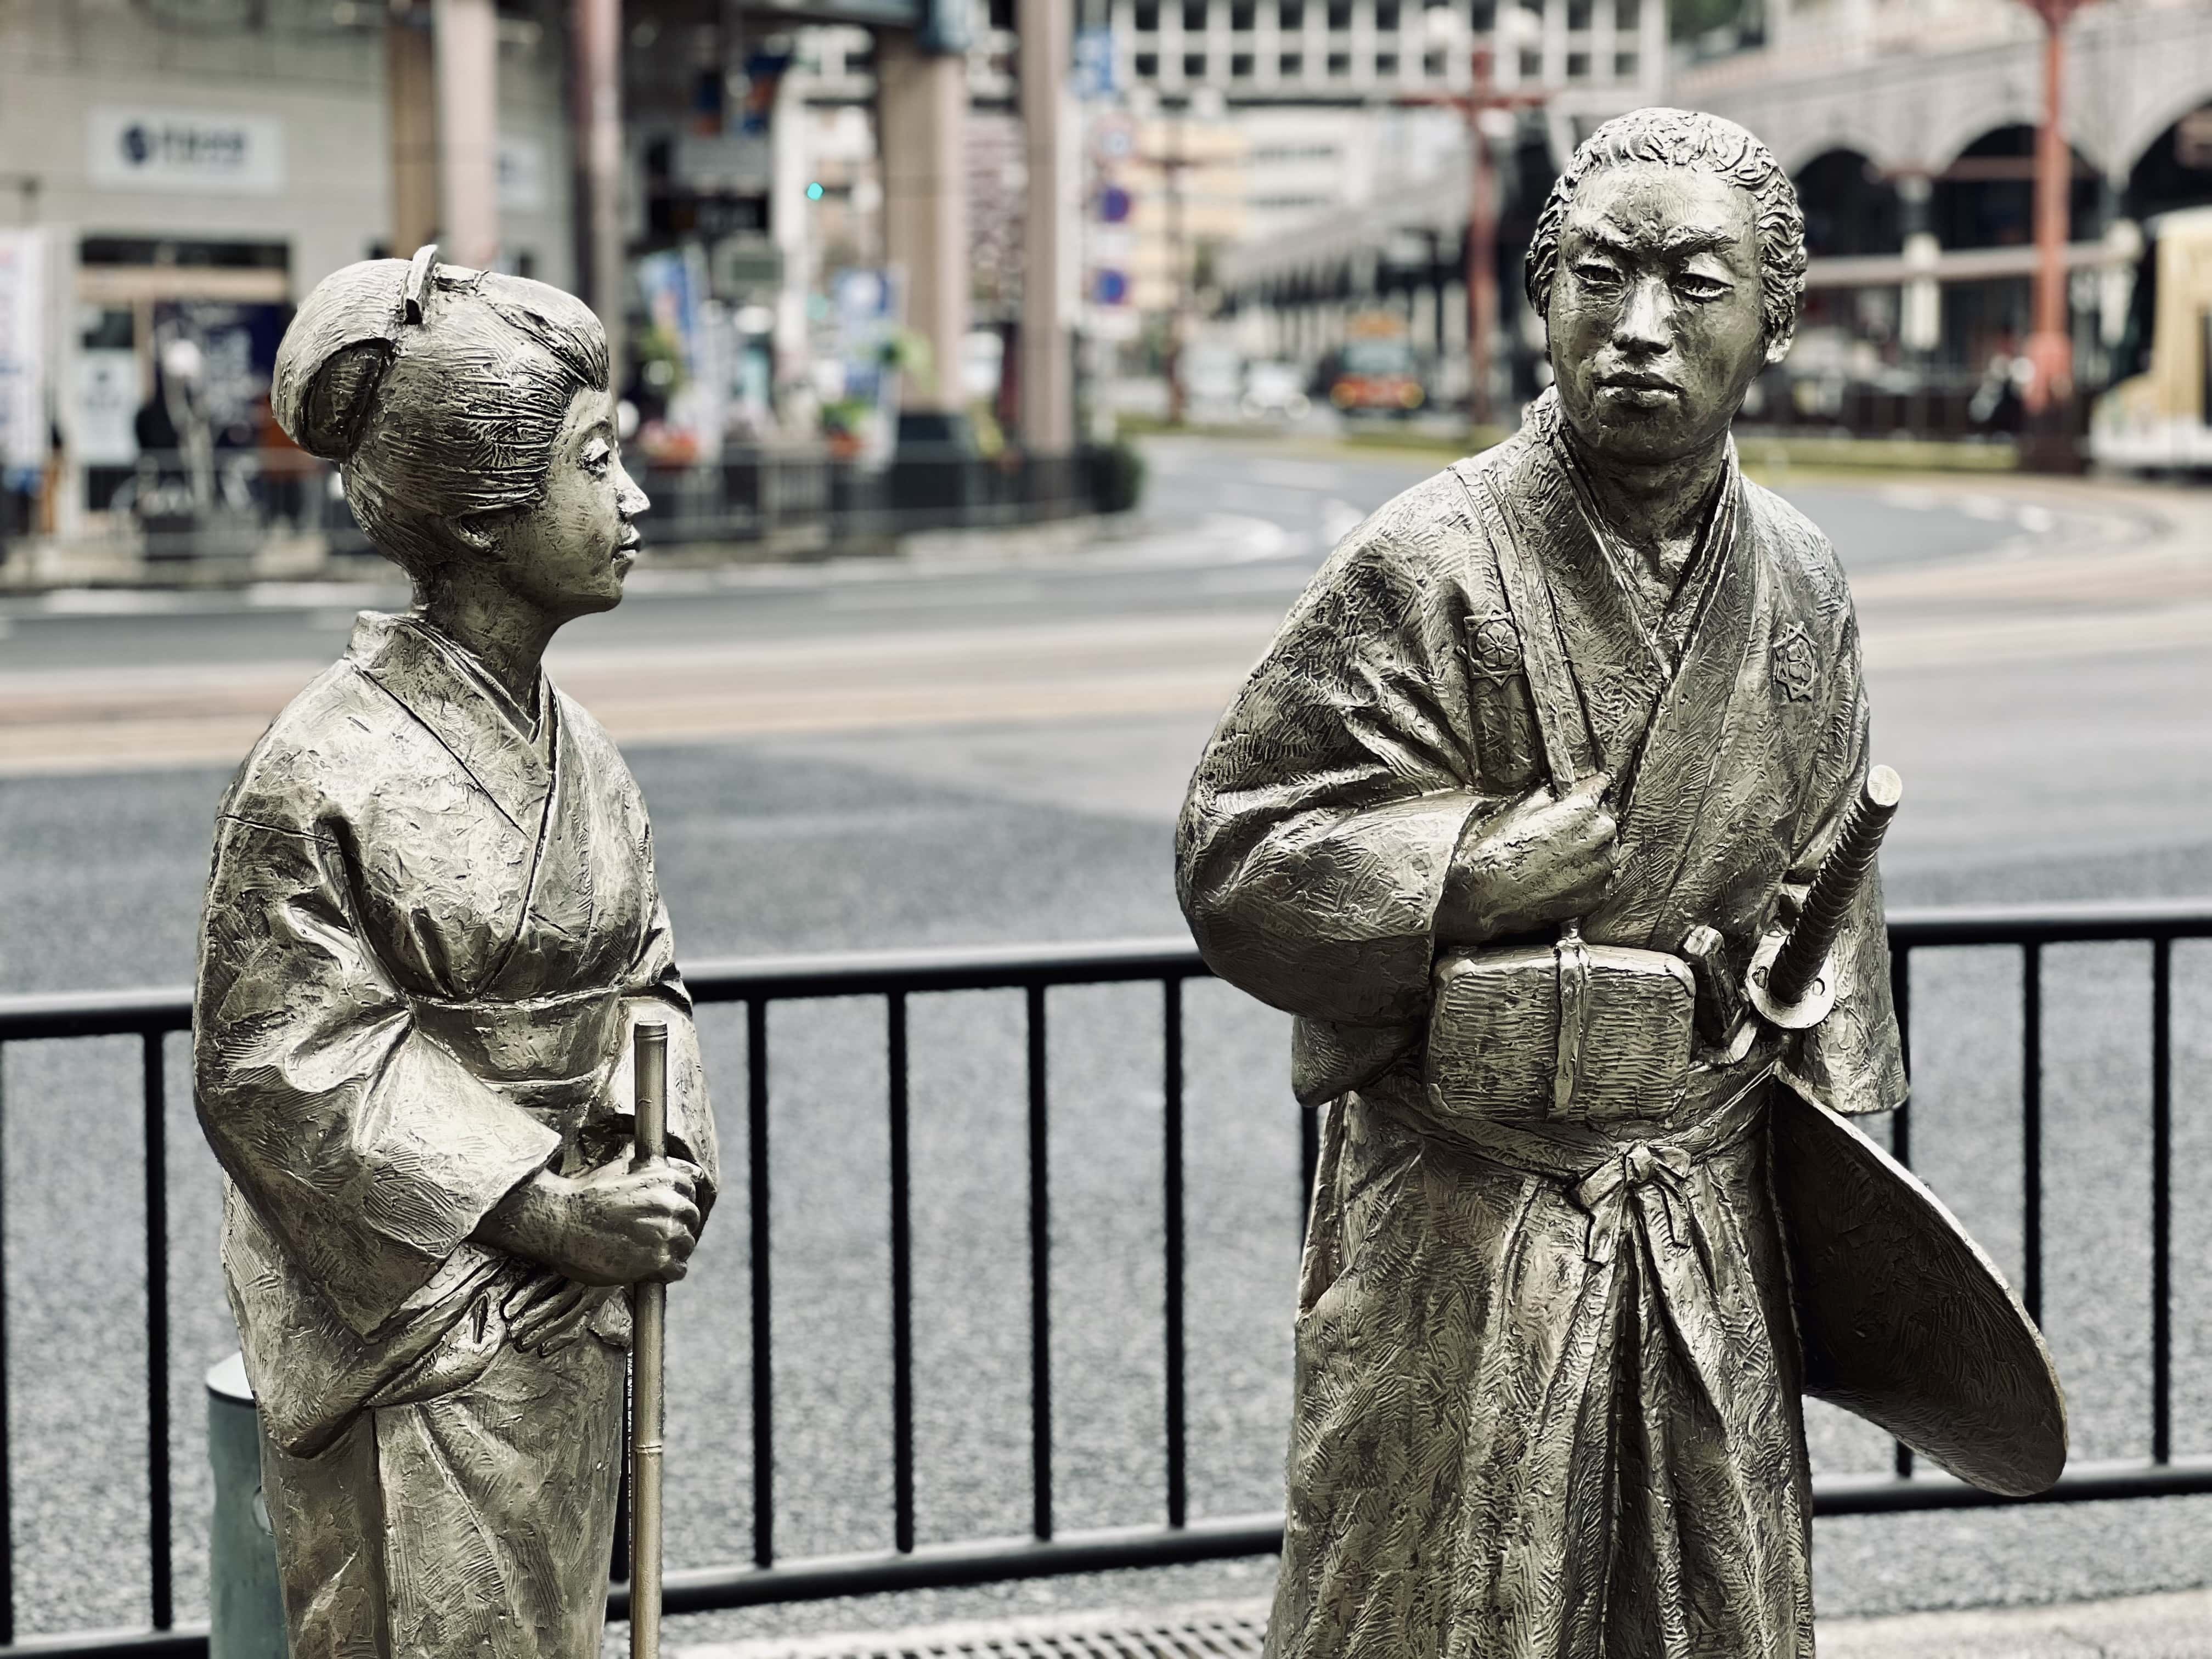 Sakamoto Ryoma and his wife, immortalized in bronze, walking the streets of Kagoshima.